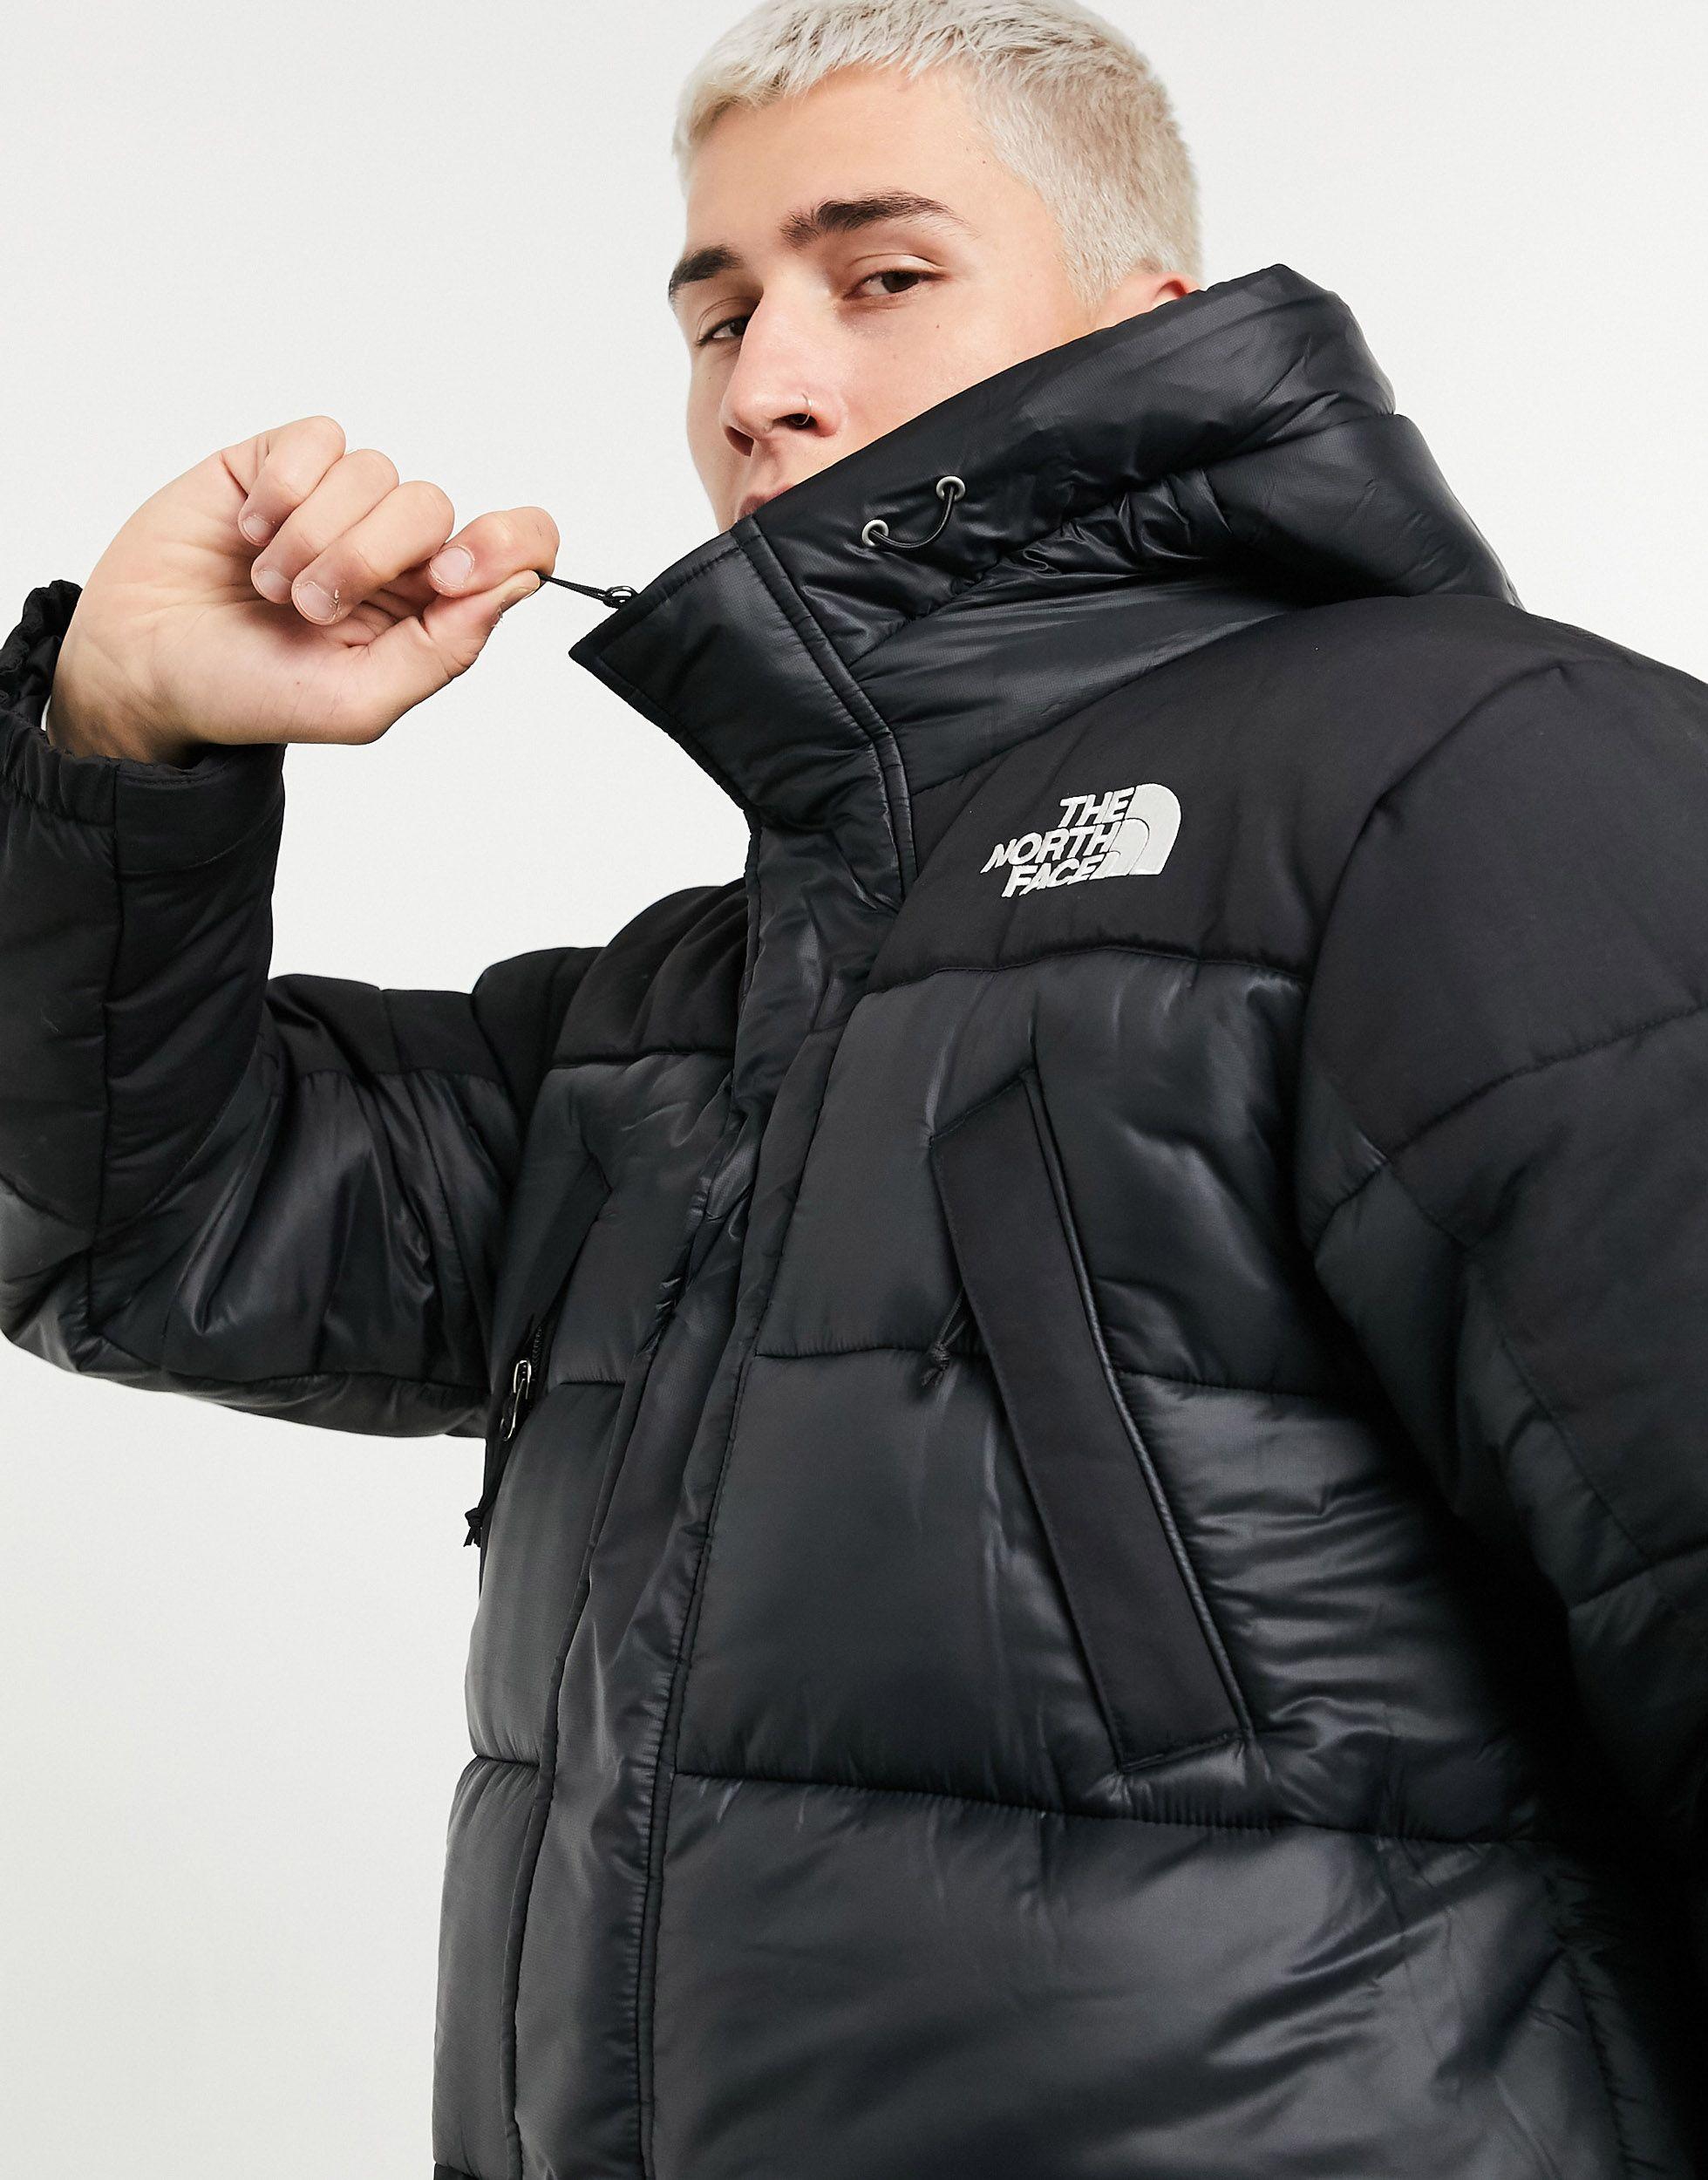 The North Face Himalayan Insulated Parka Jacket in Black for Men - Lyst